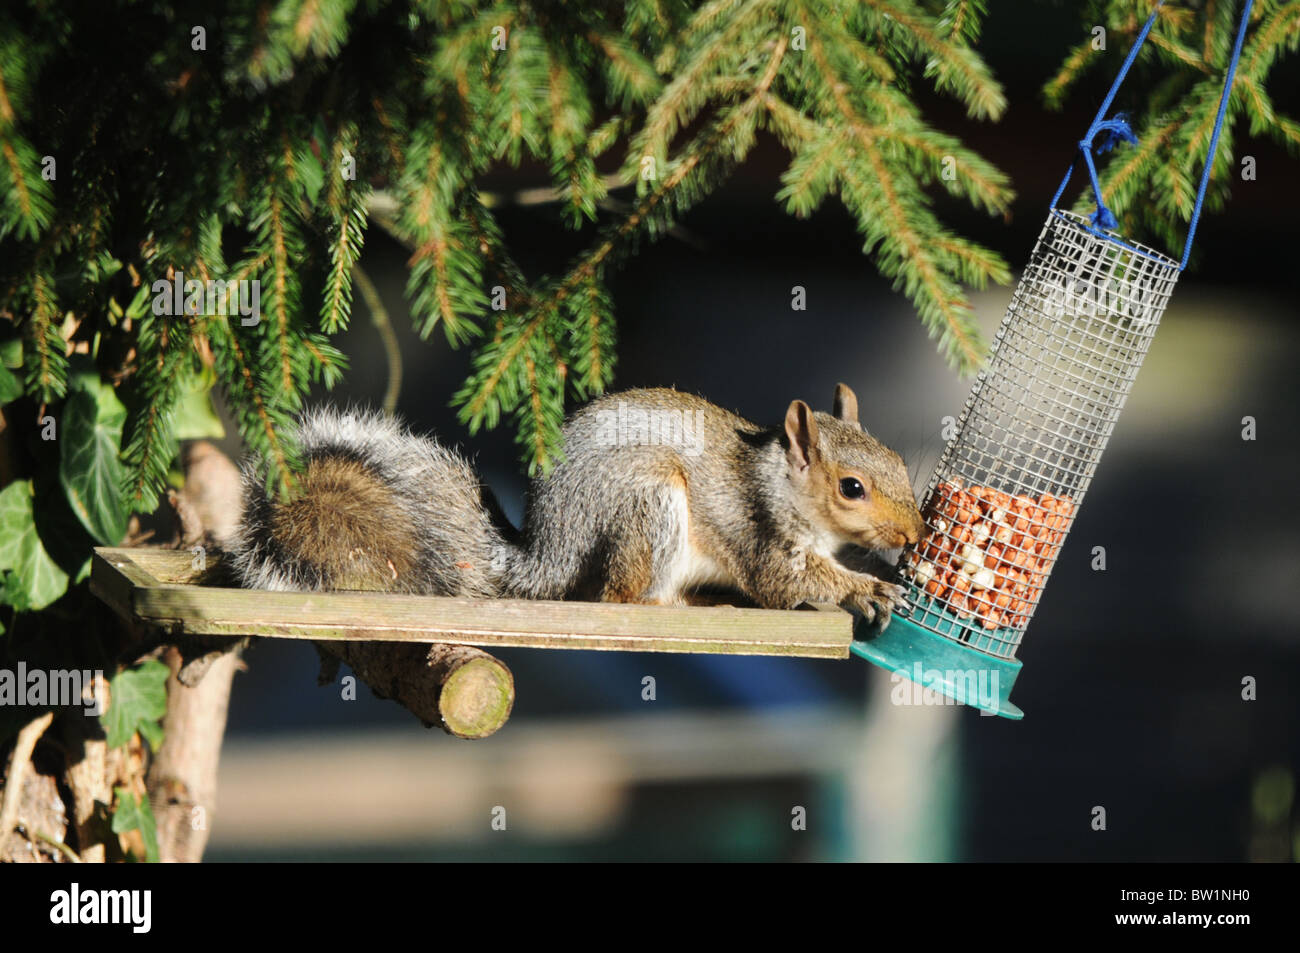 Grey squirrel eating nuts from a bird feeder Stock Photo